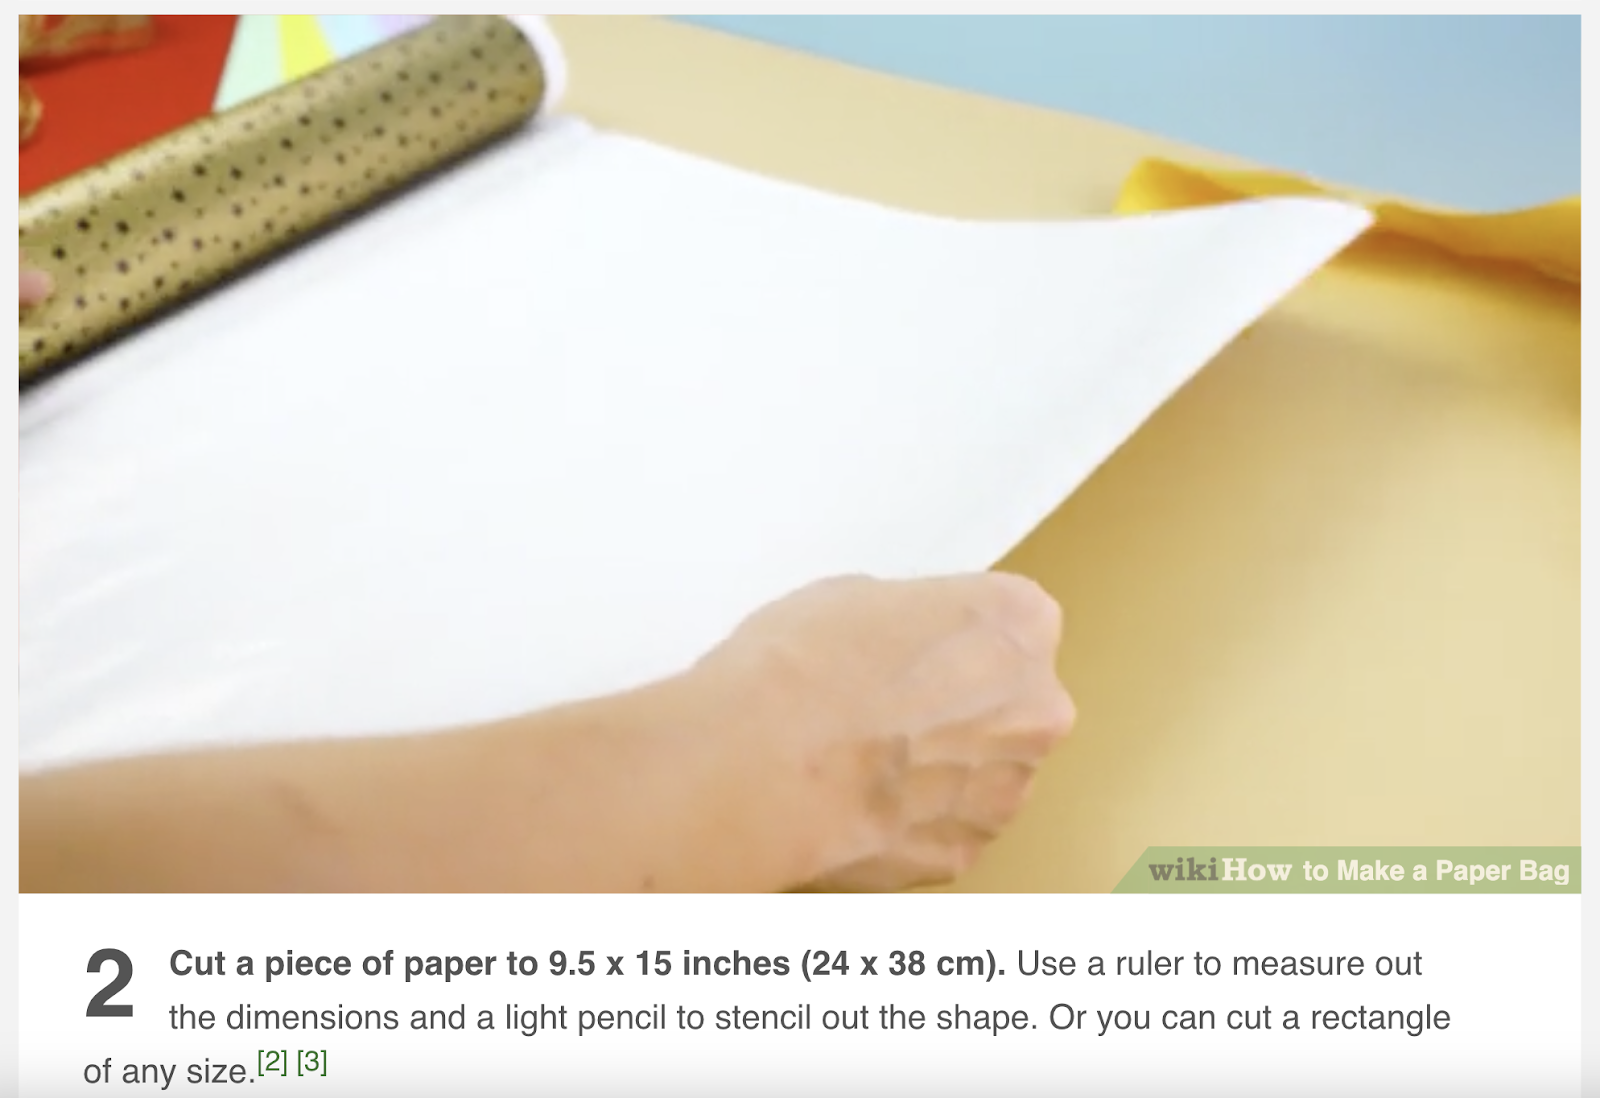 a screenshot from "wikiHow to Make a Paper Bag" animated image